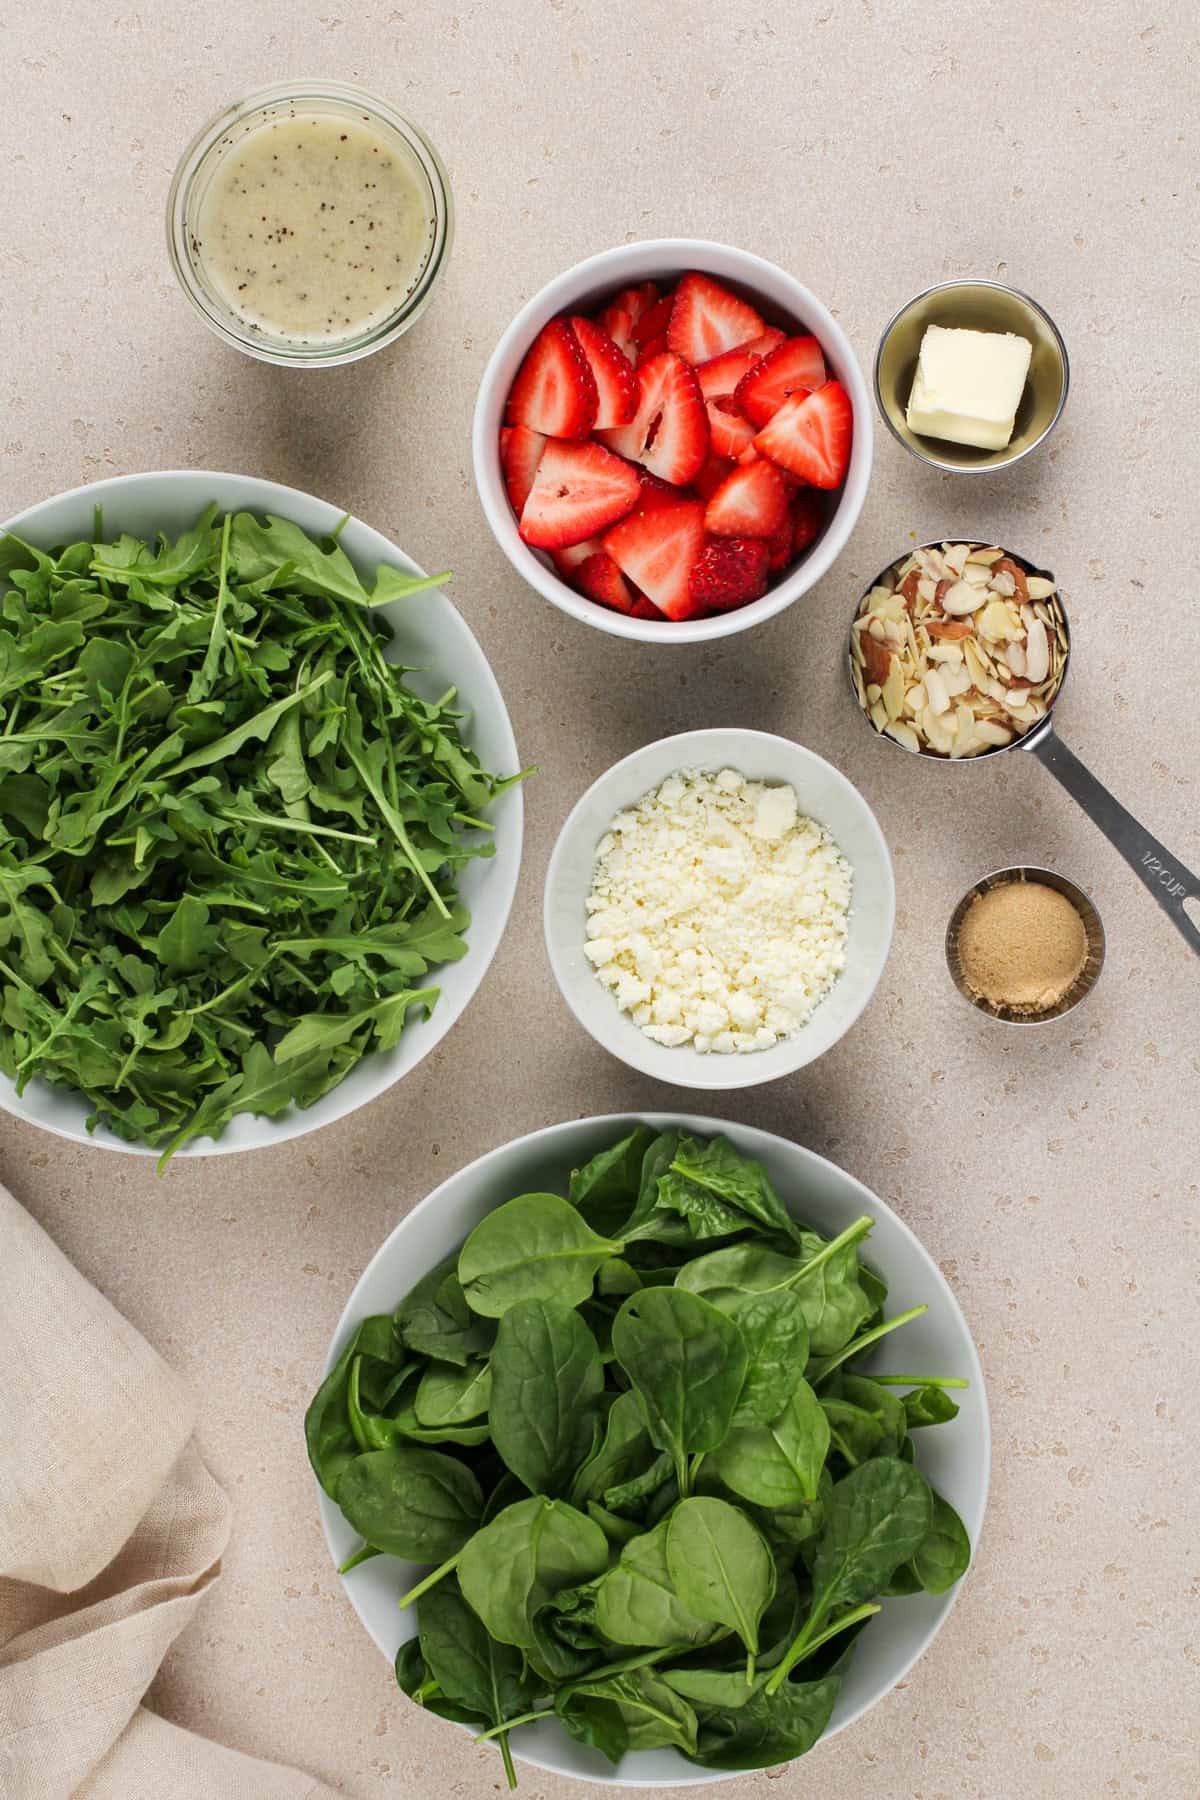 Strawberry salad ingredients arranged on a beige countertop.